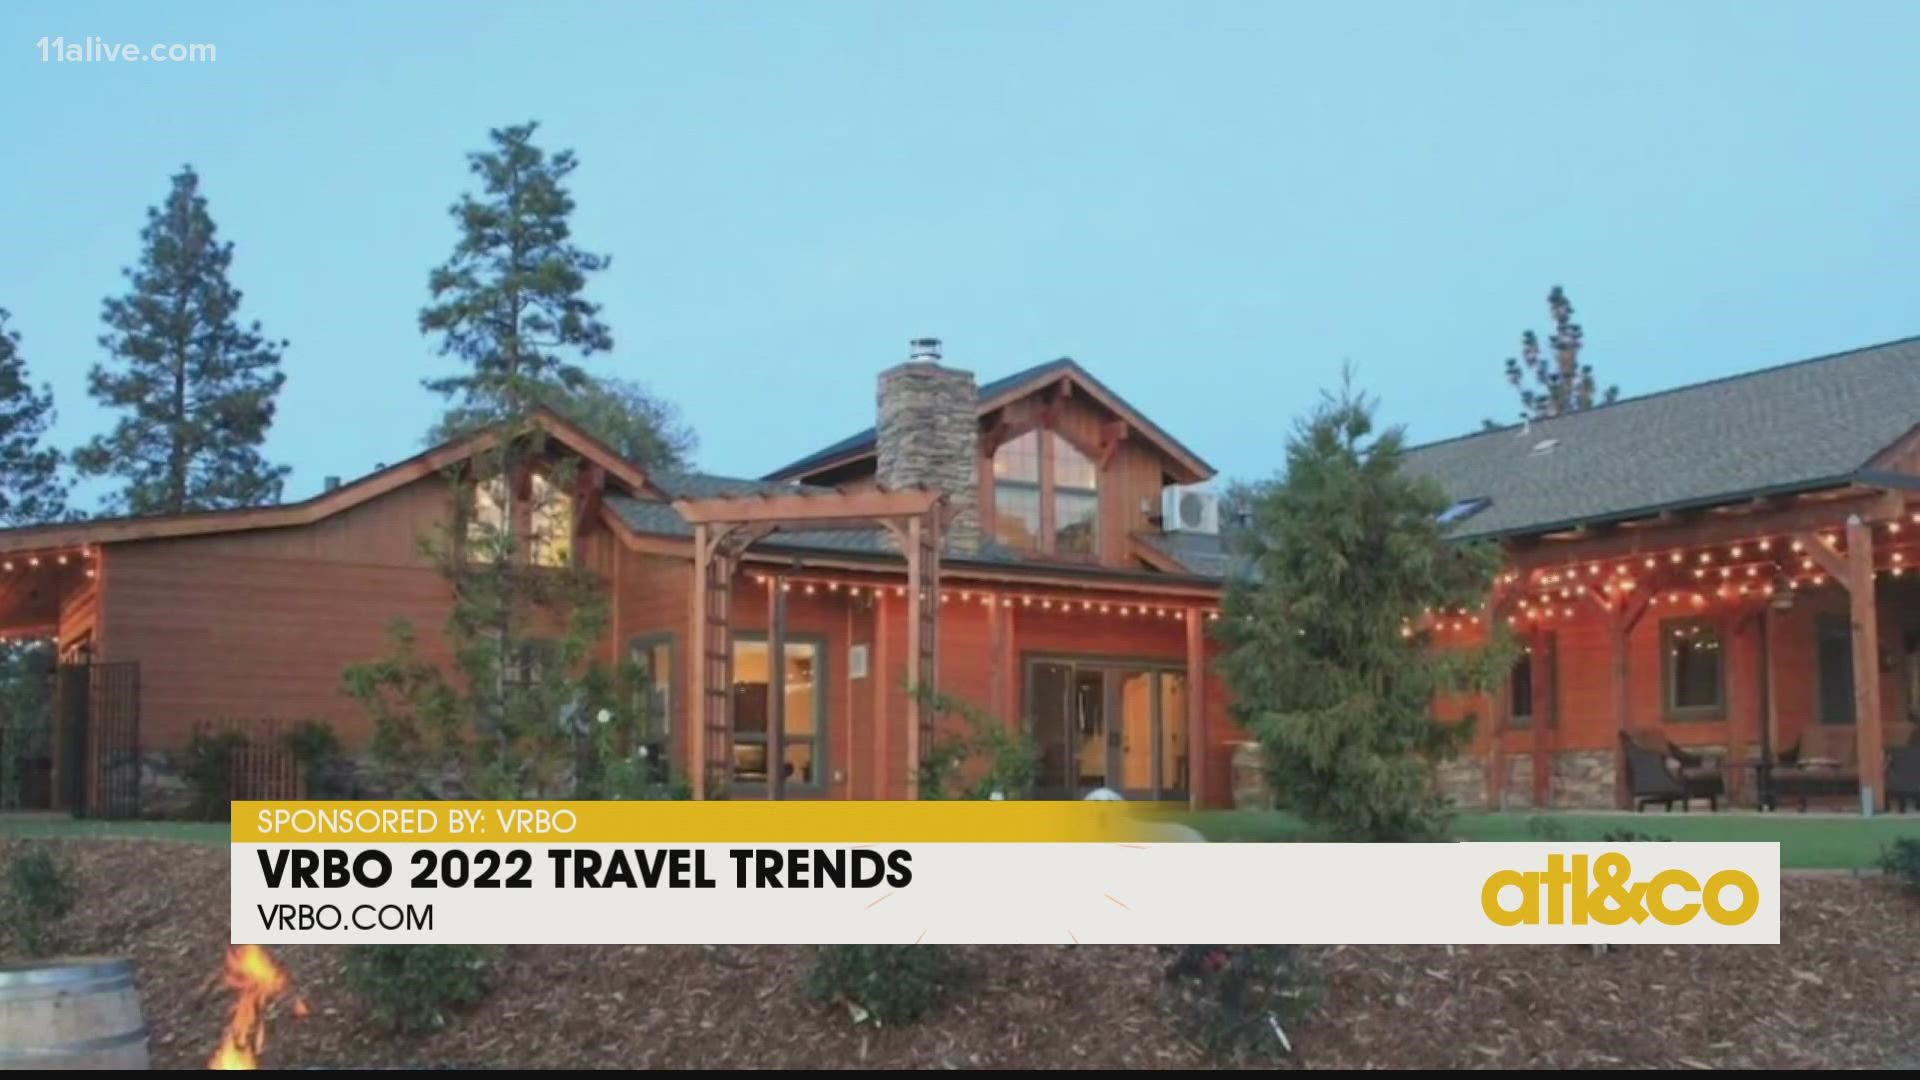 Book that perfect getaway for next year! Vrbo travel expert Melanie Fish has the top trends report.